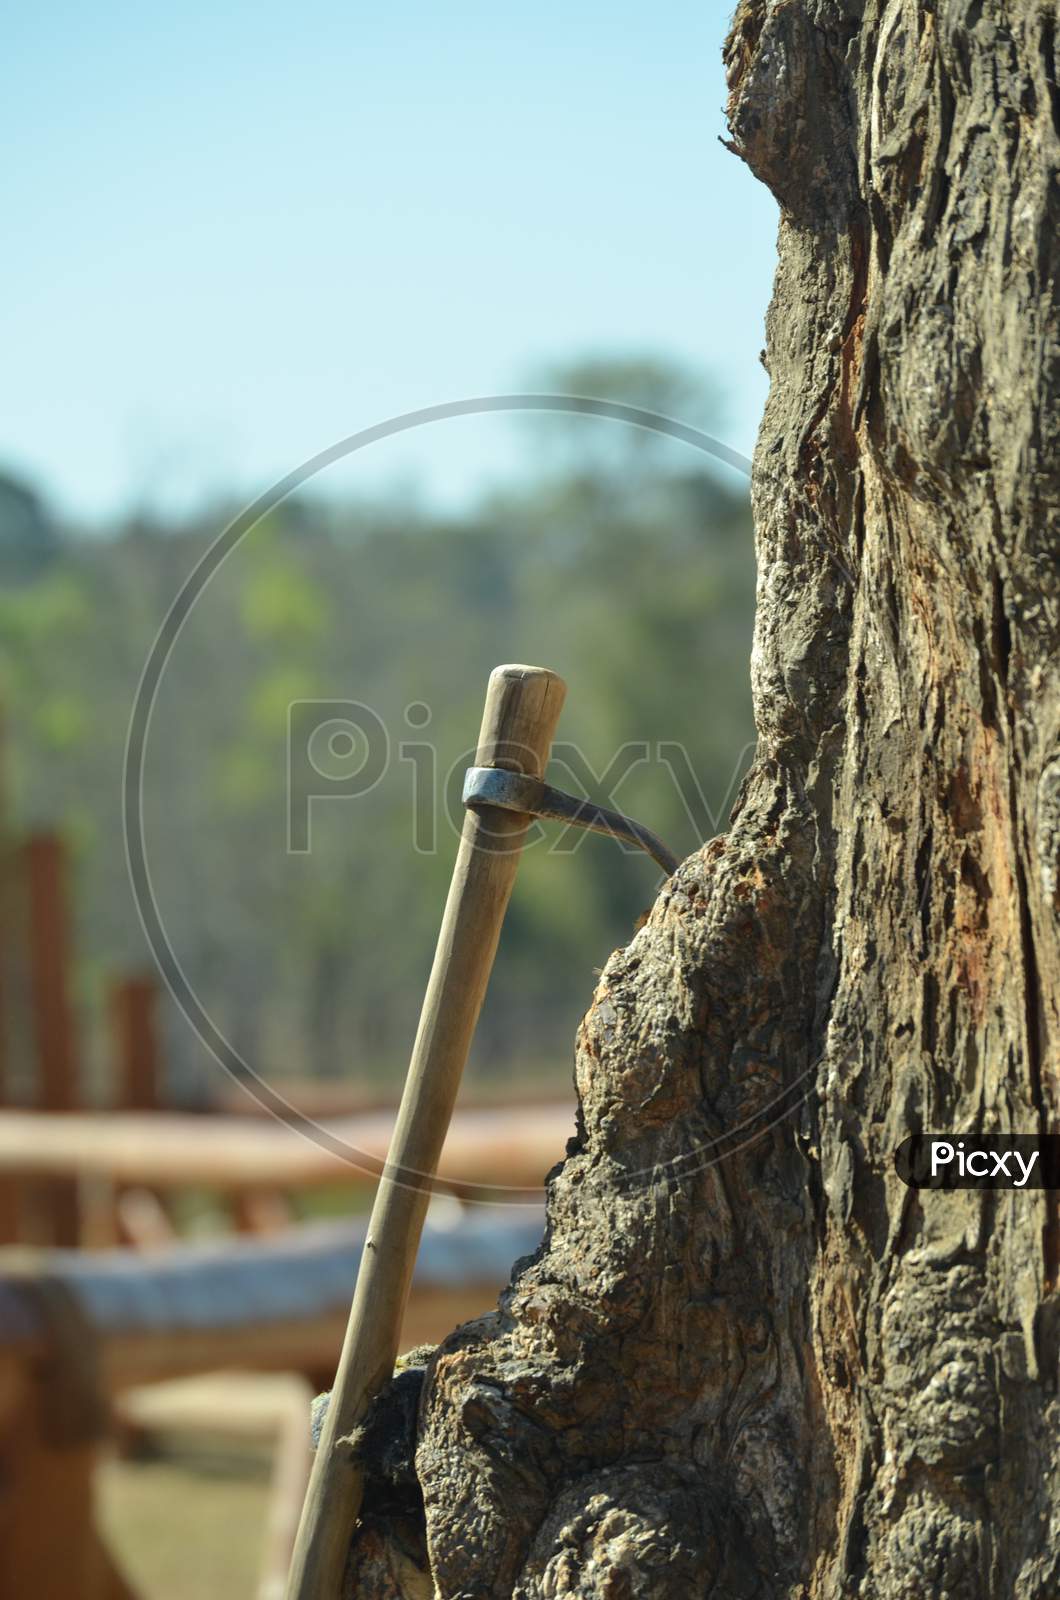 Axe   At a Tree, Deforestation Concept